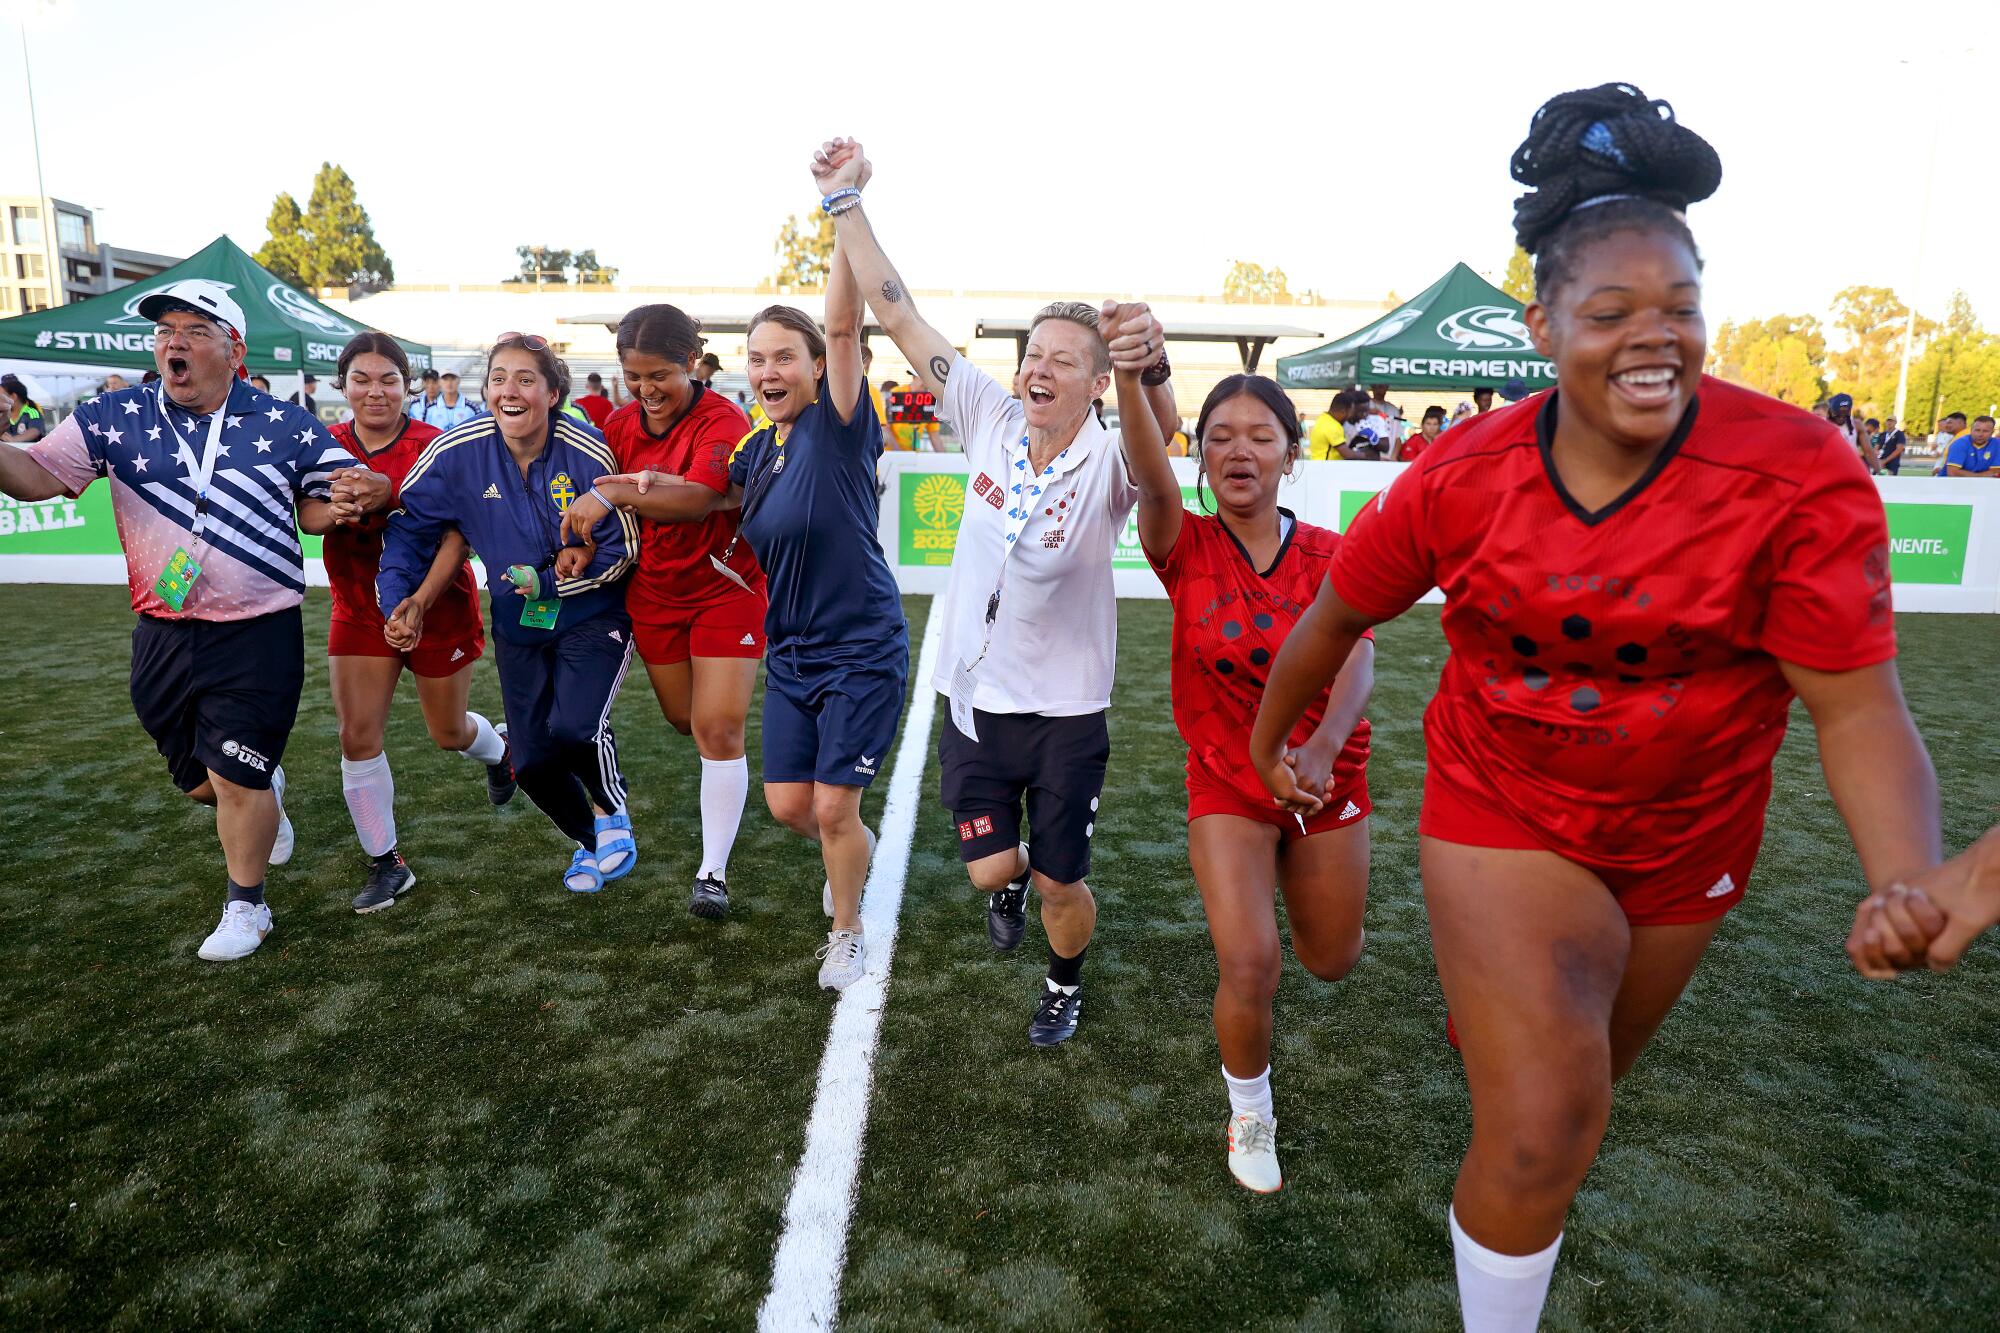 They laughed at first, then they were cool with it': Meet soccer's